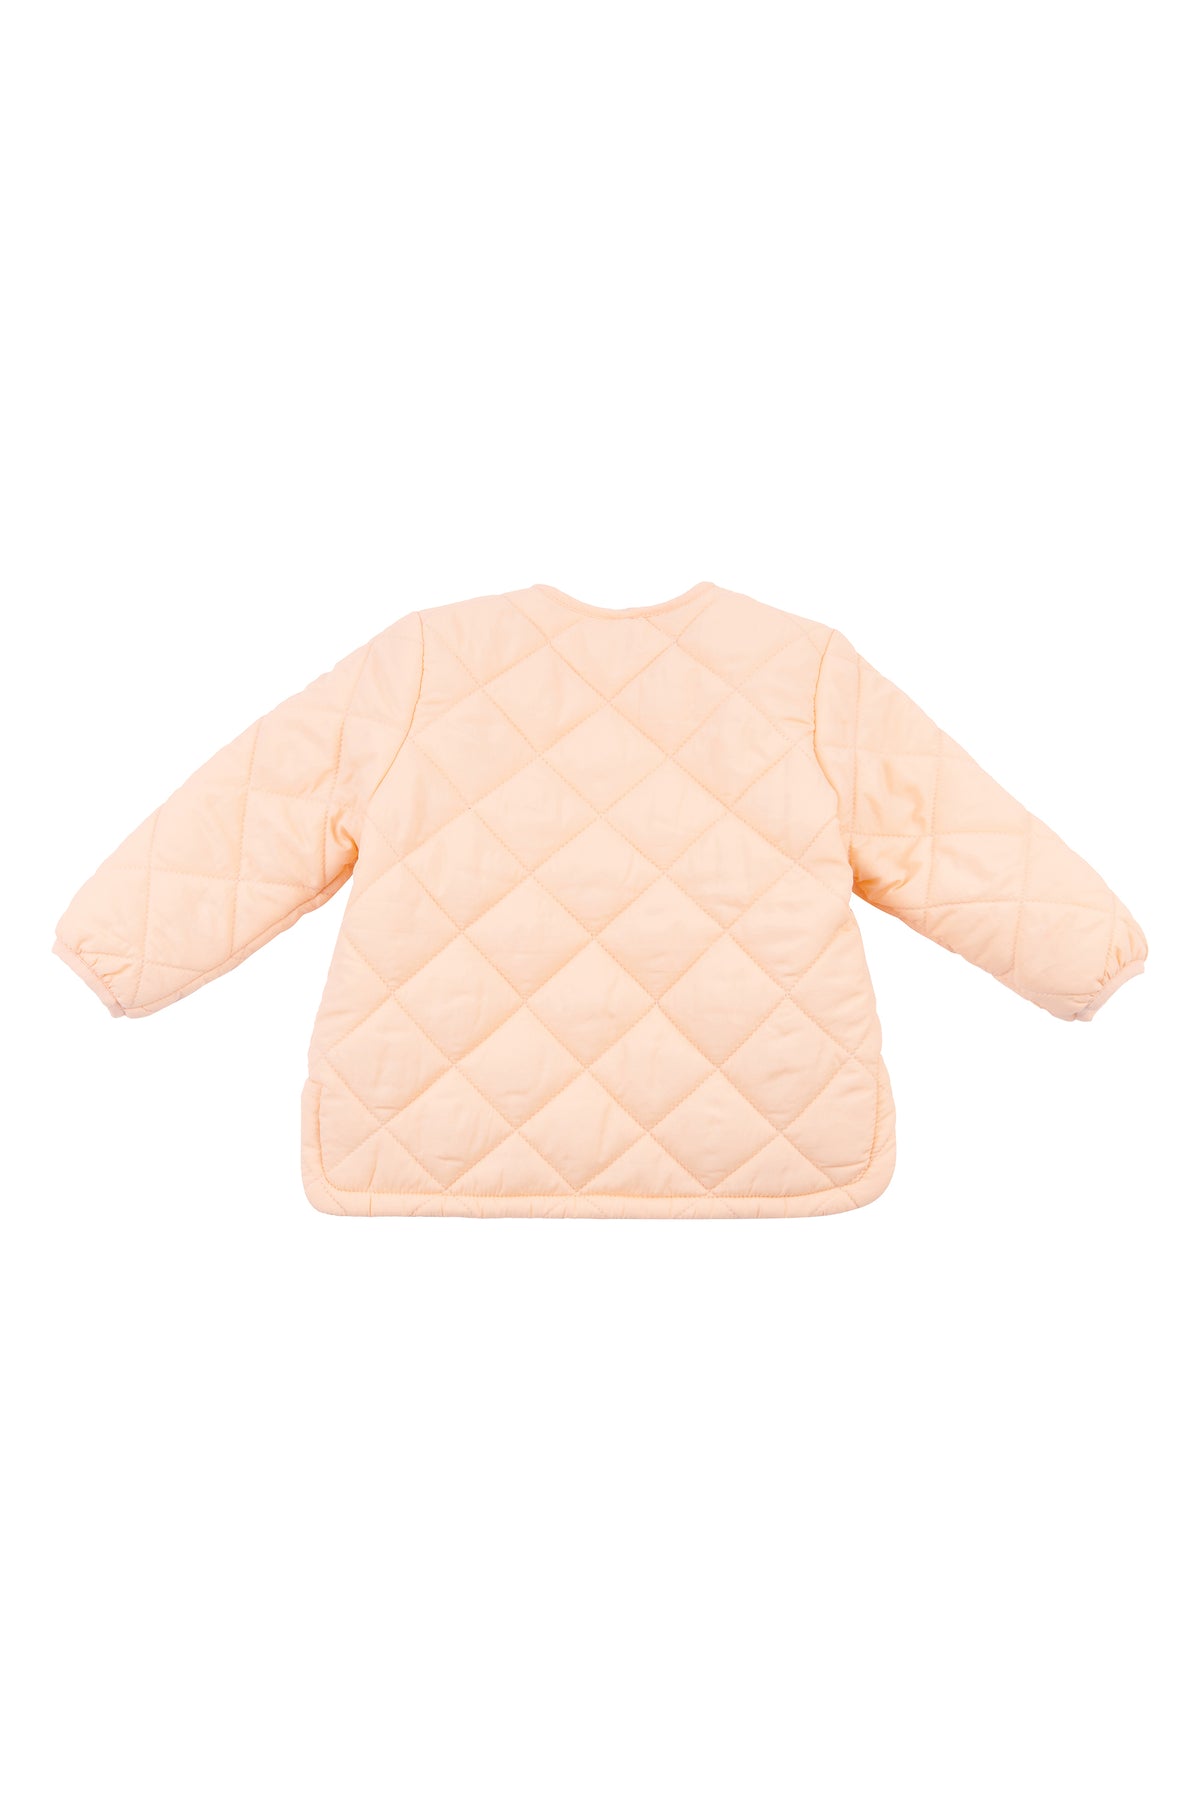 Baby Quilted Jacket in Prairie Sunset